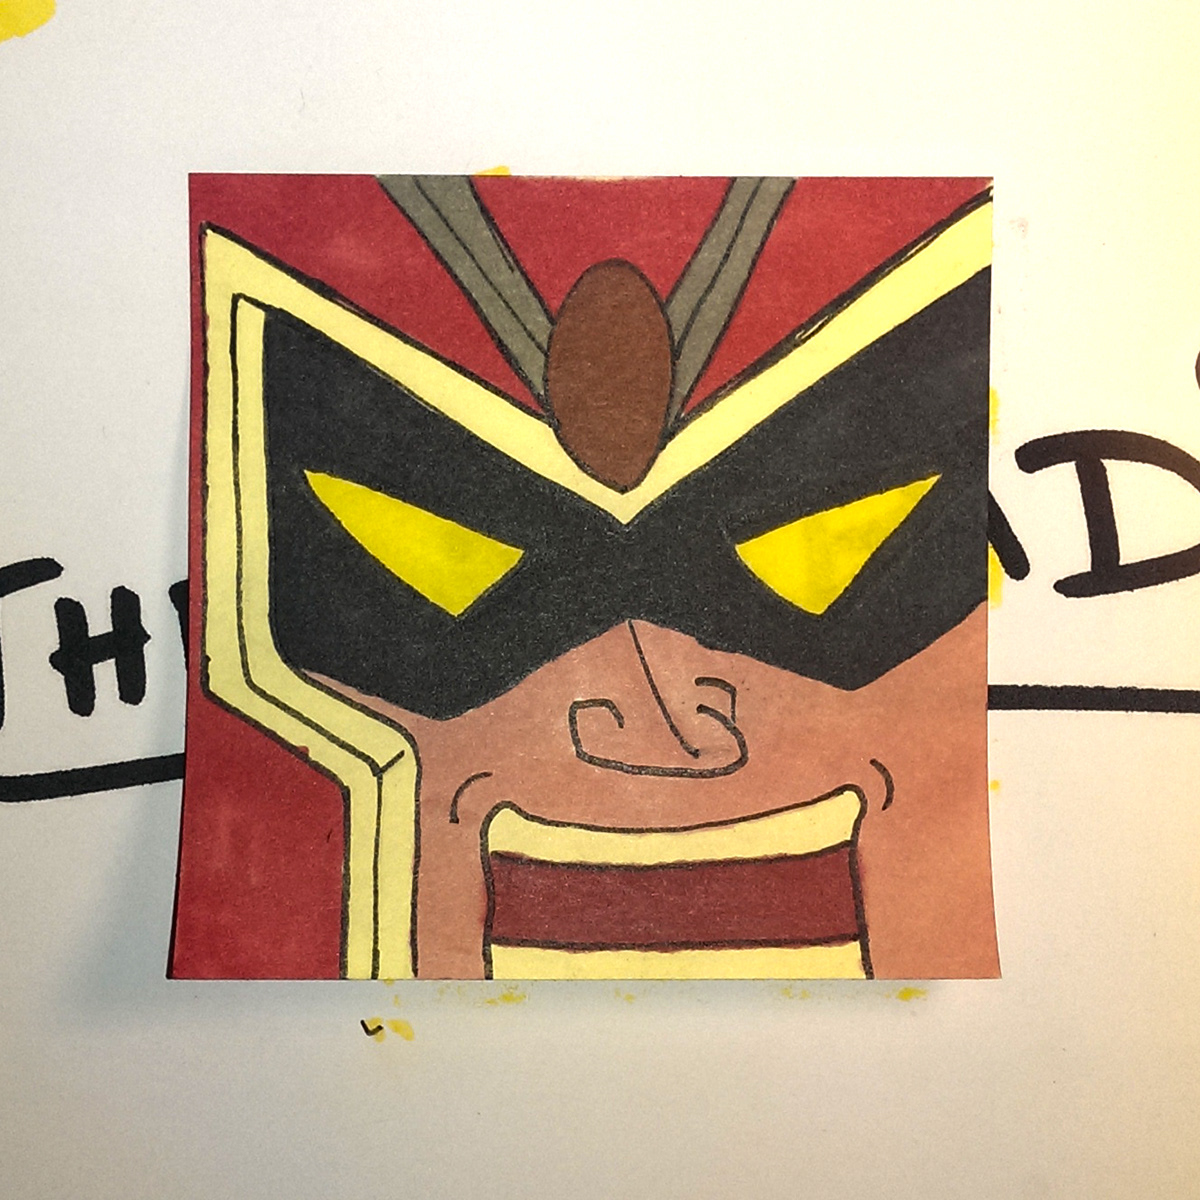 Character Post-it sketch doodle daily project daily